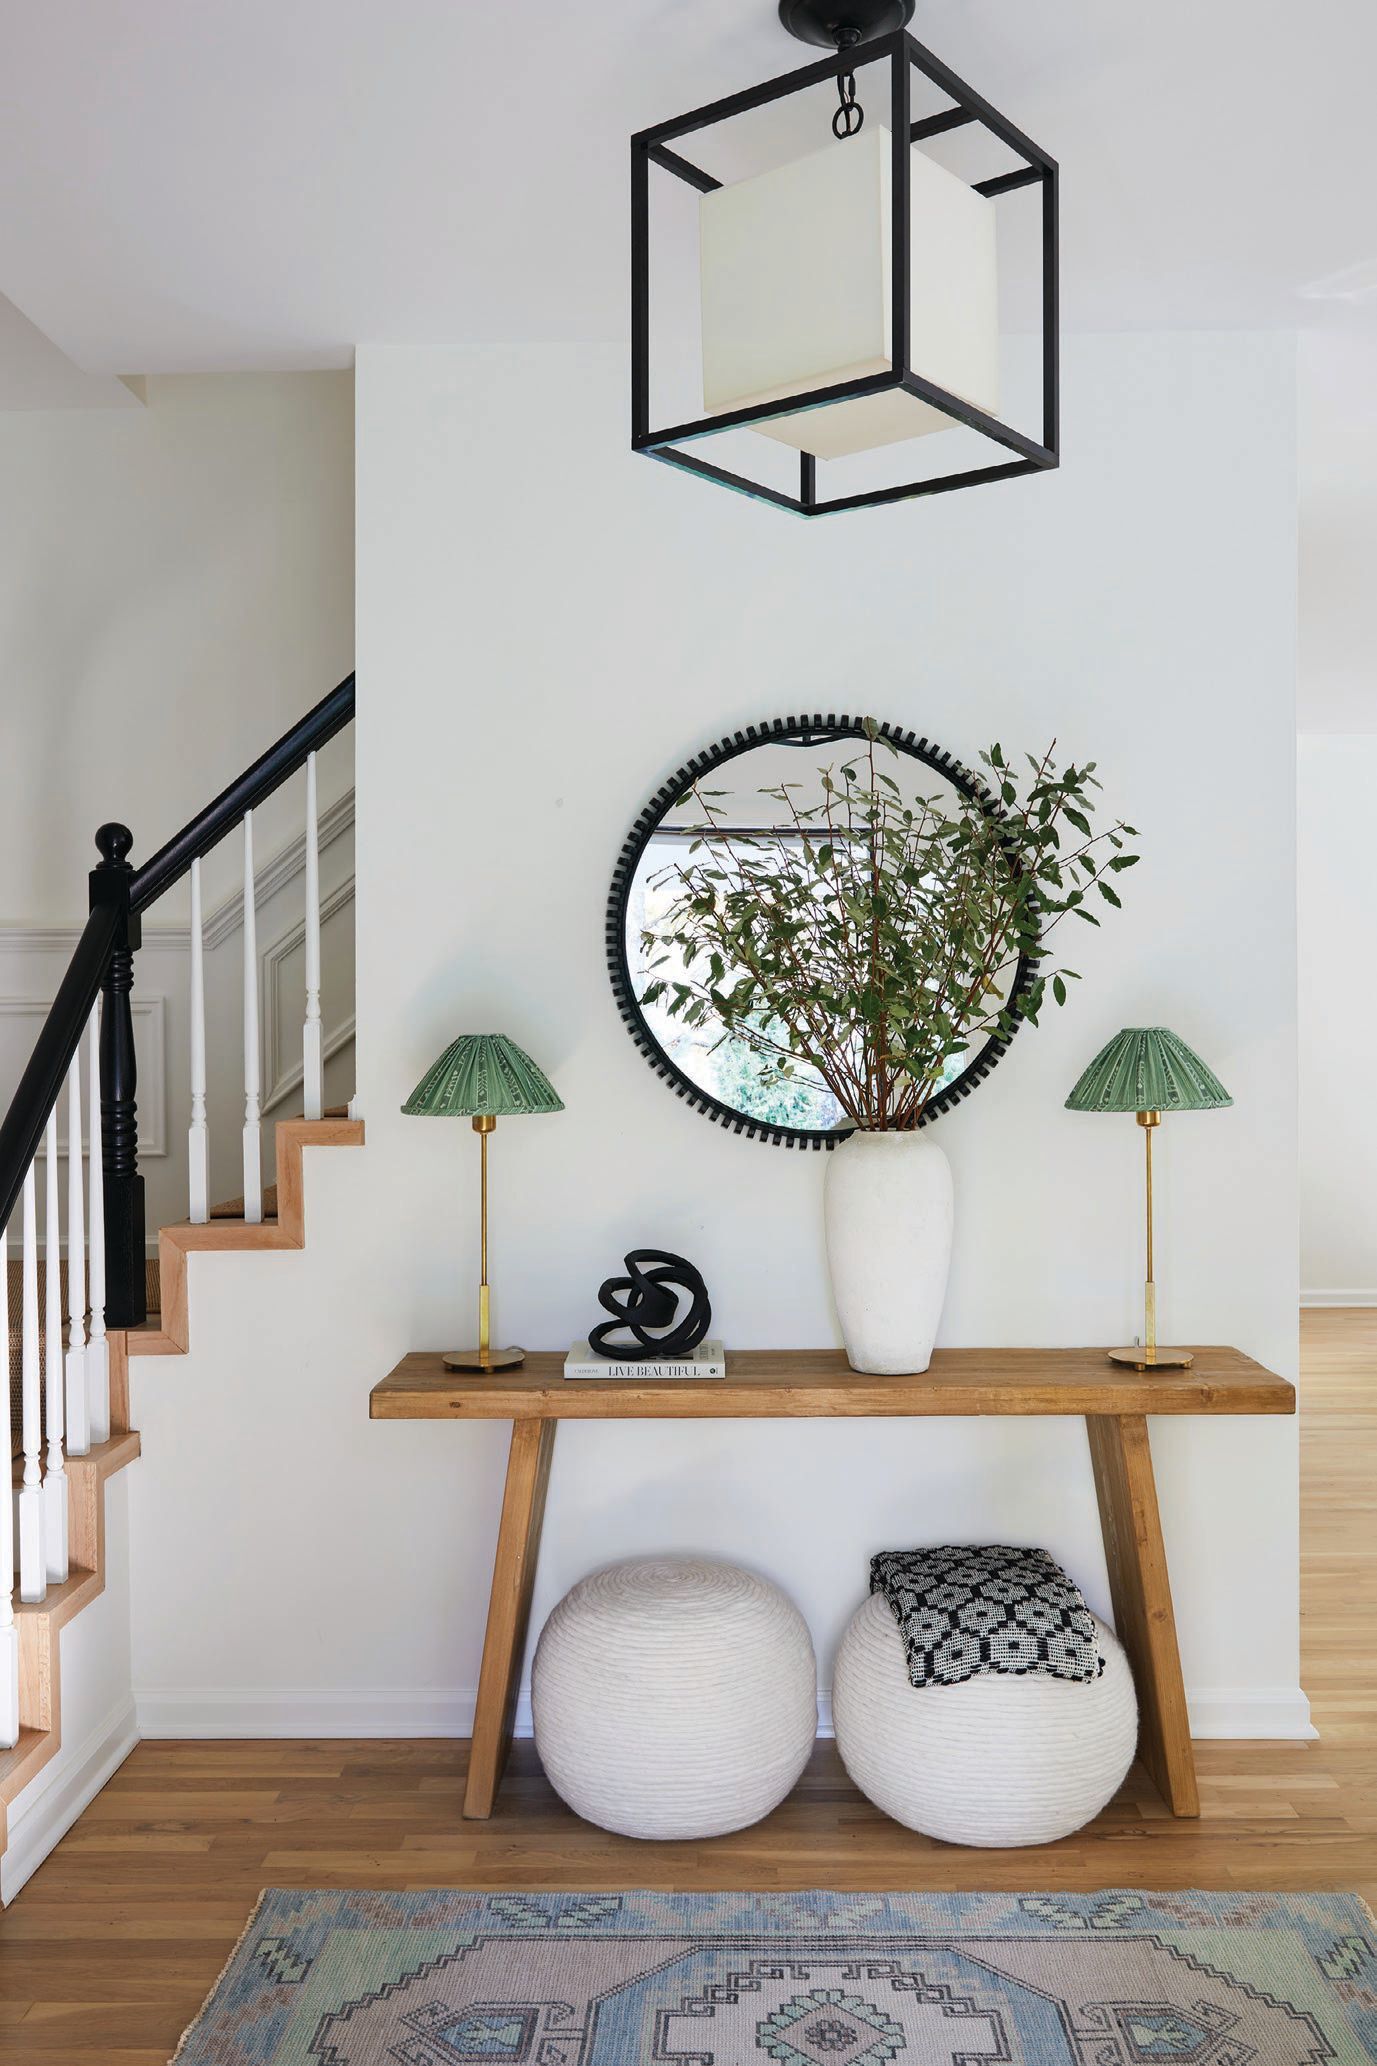 The entryway greets guests with an open floor plan, fit with a stunning RH console, vibrant lampshades, an eye-catching mirror and much, much more.  PHOTOGRAPHED BY KIRSTEN FRANCIS